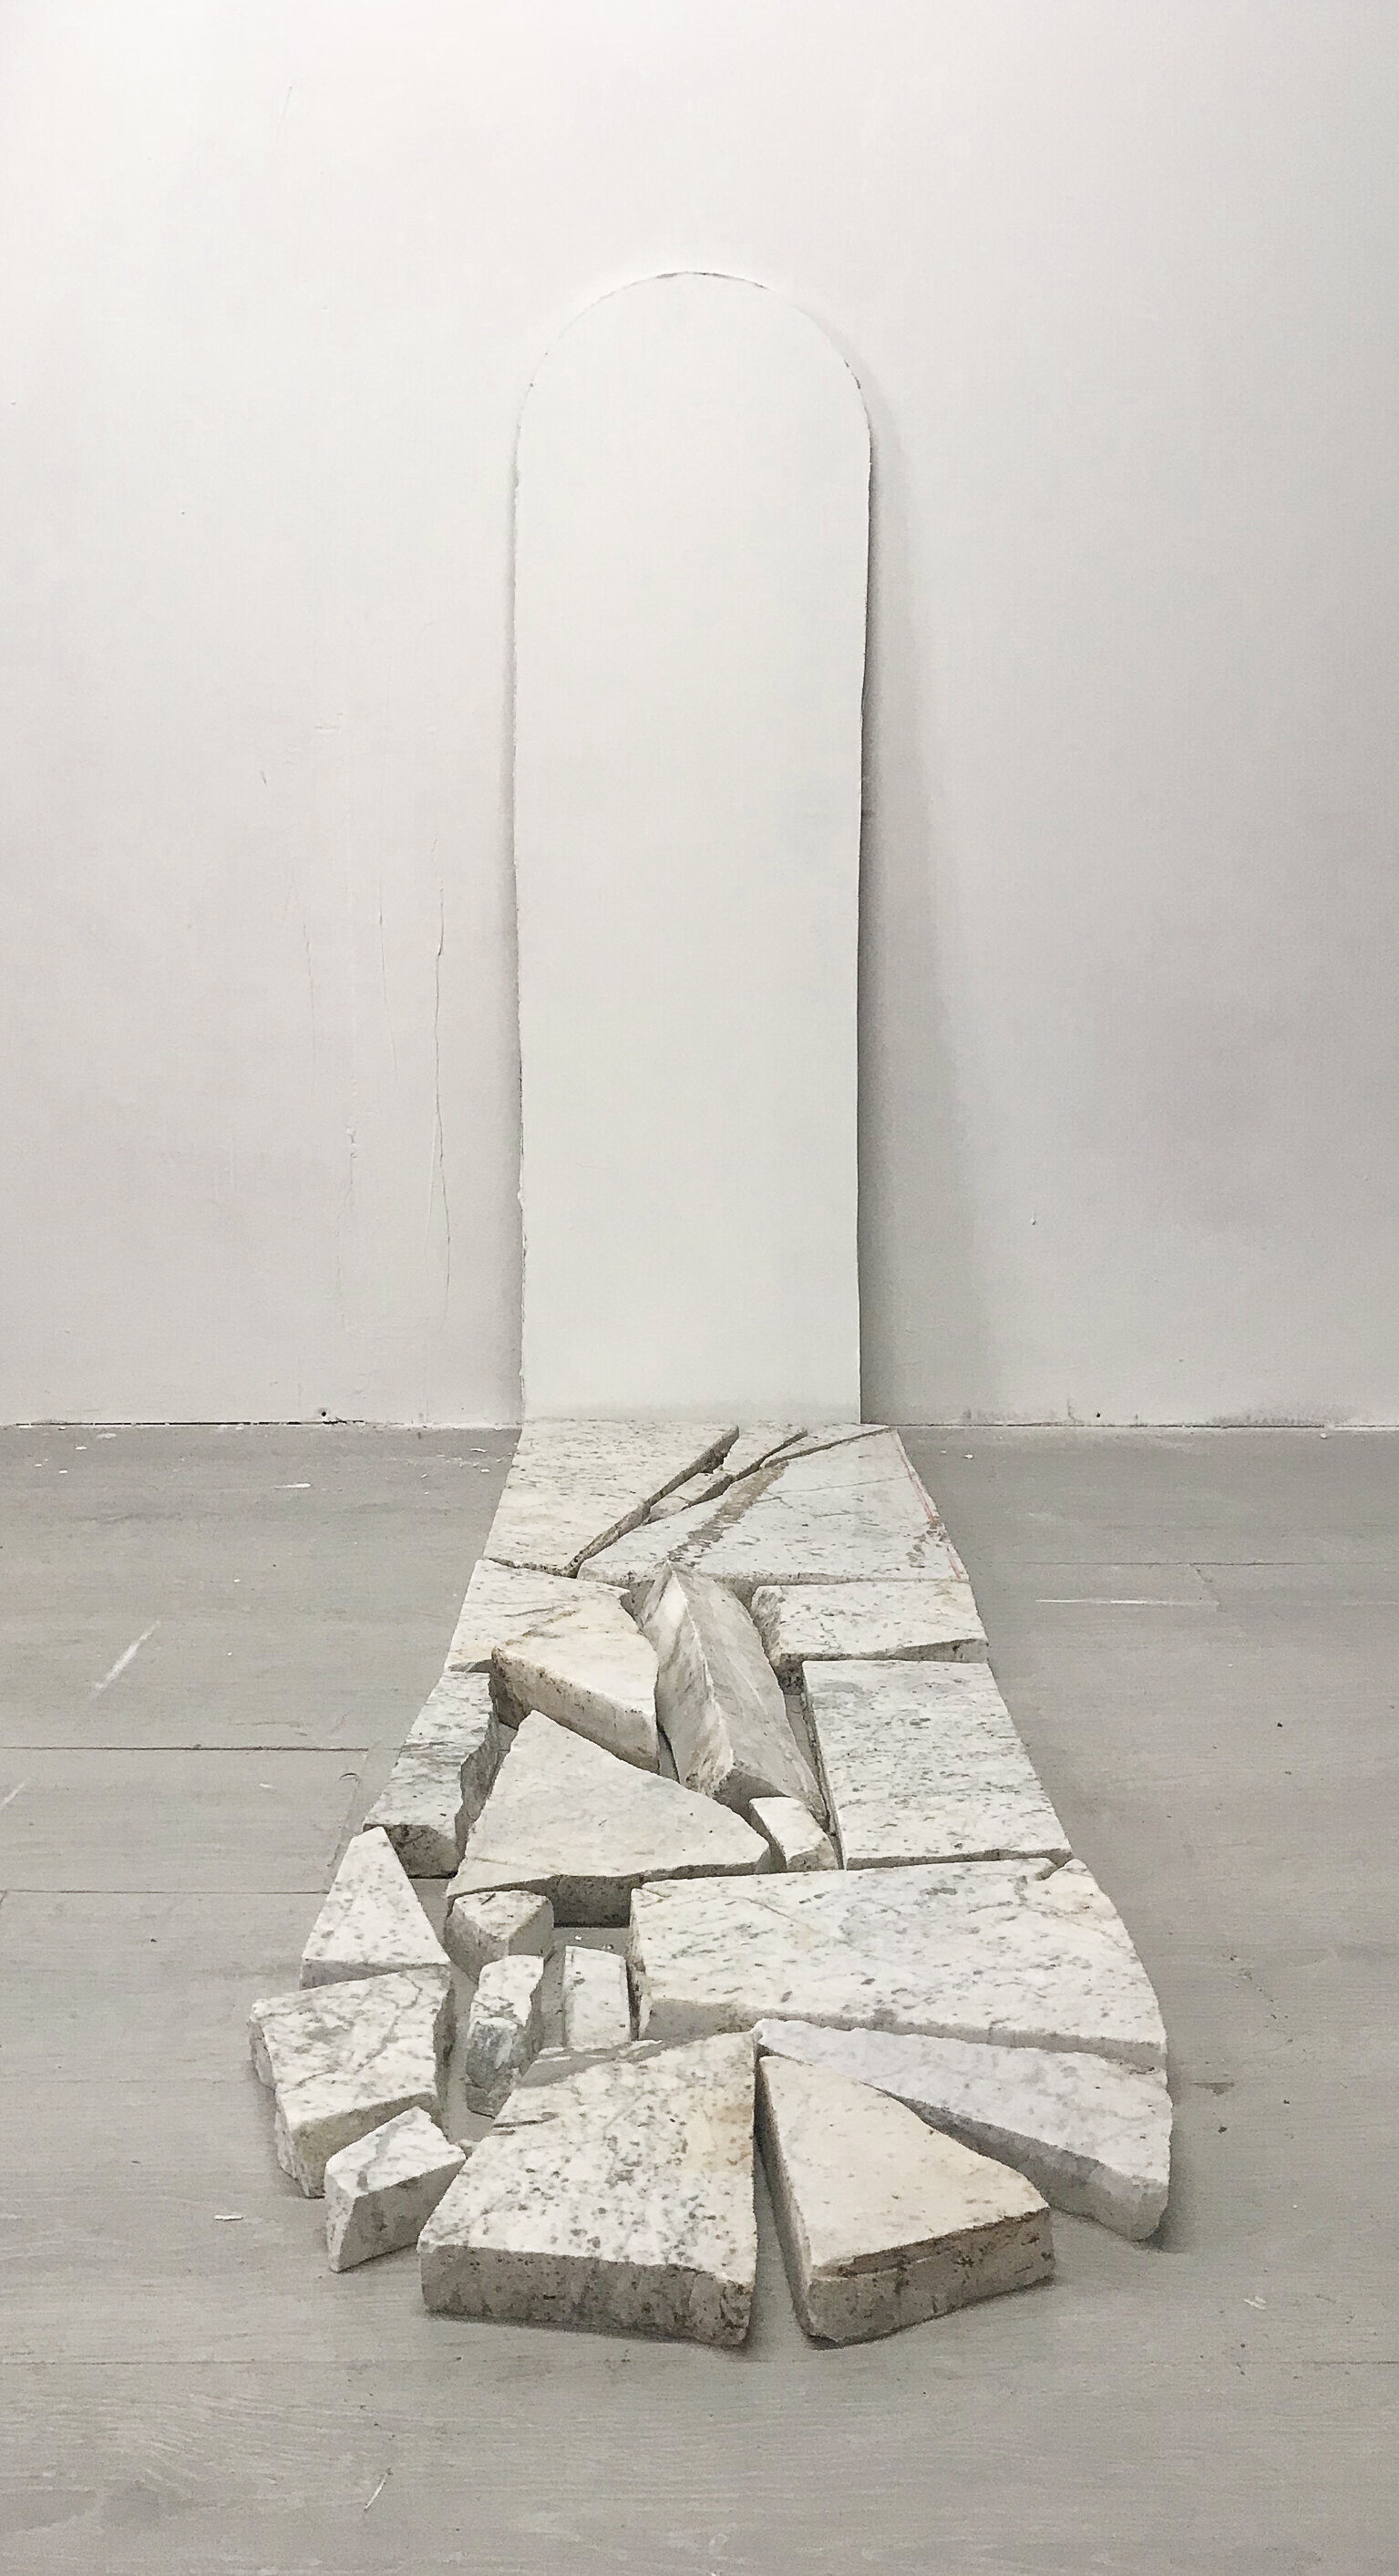 Falling apart or standing still, installation - Statuario marble and drywall, 2019